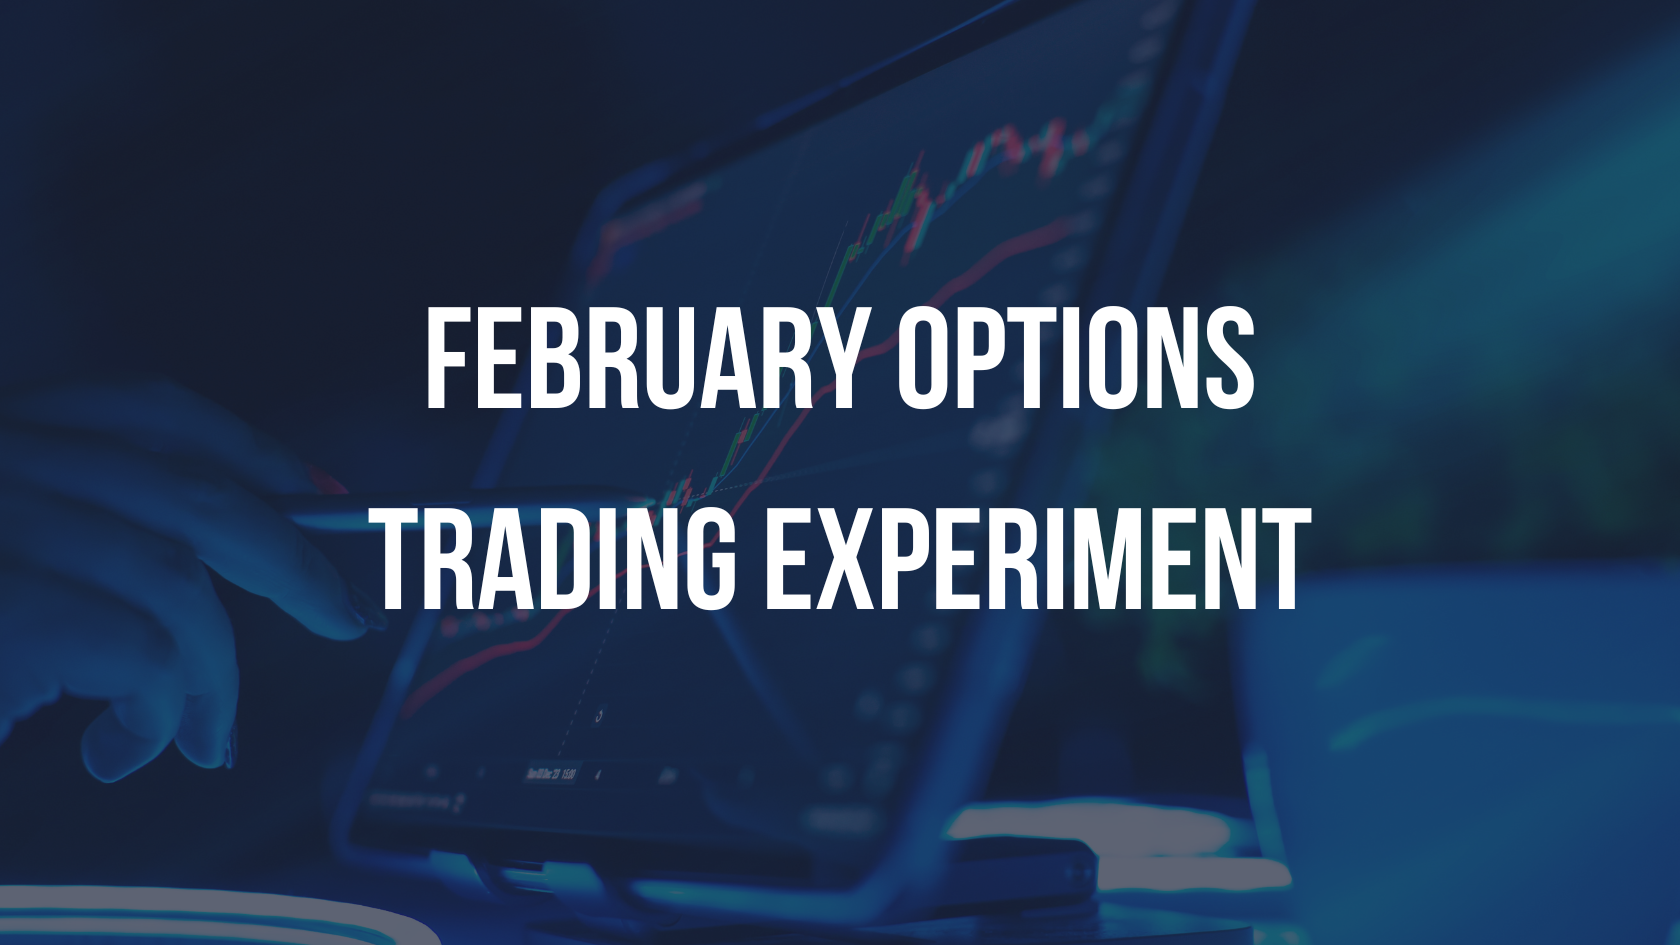 The February Options Trading Experiment